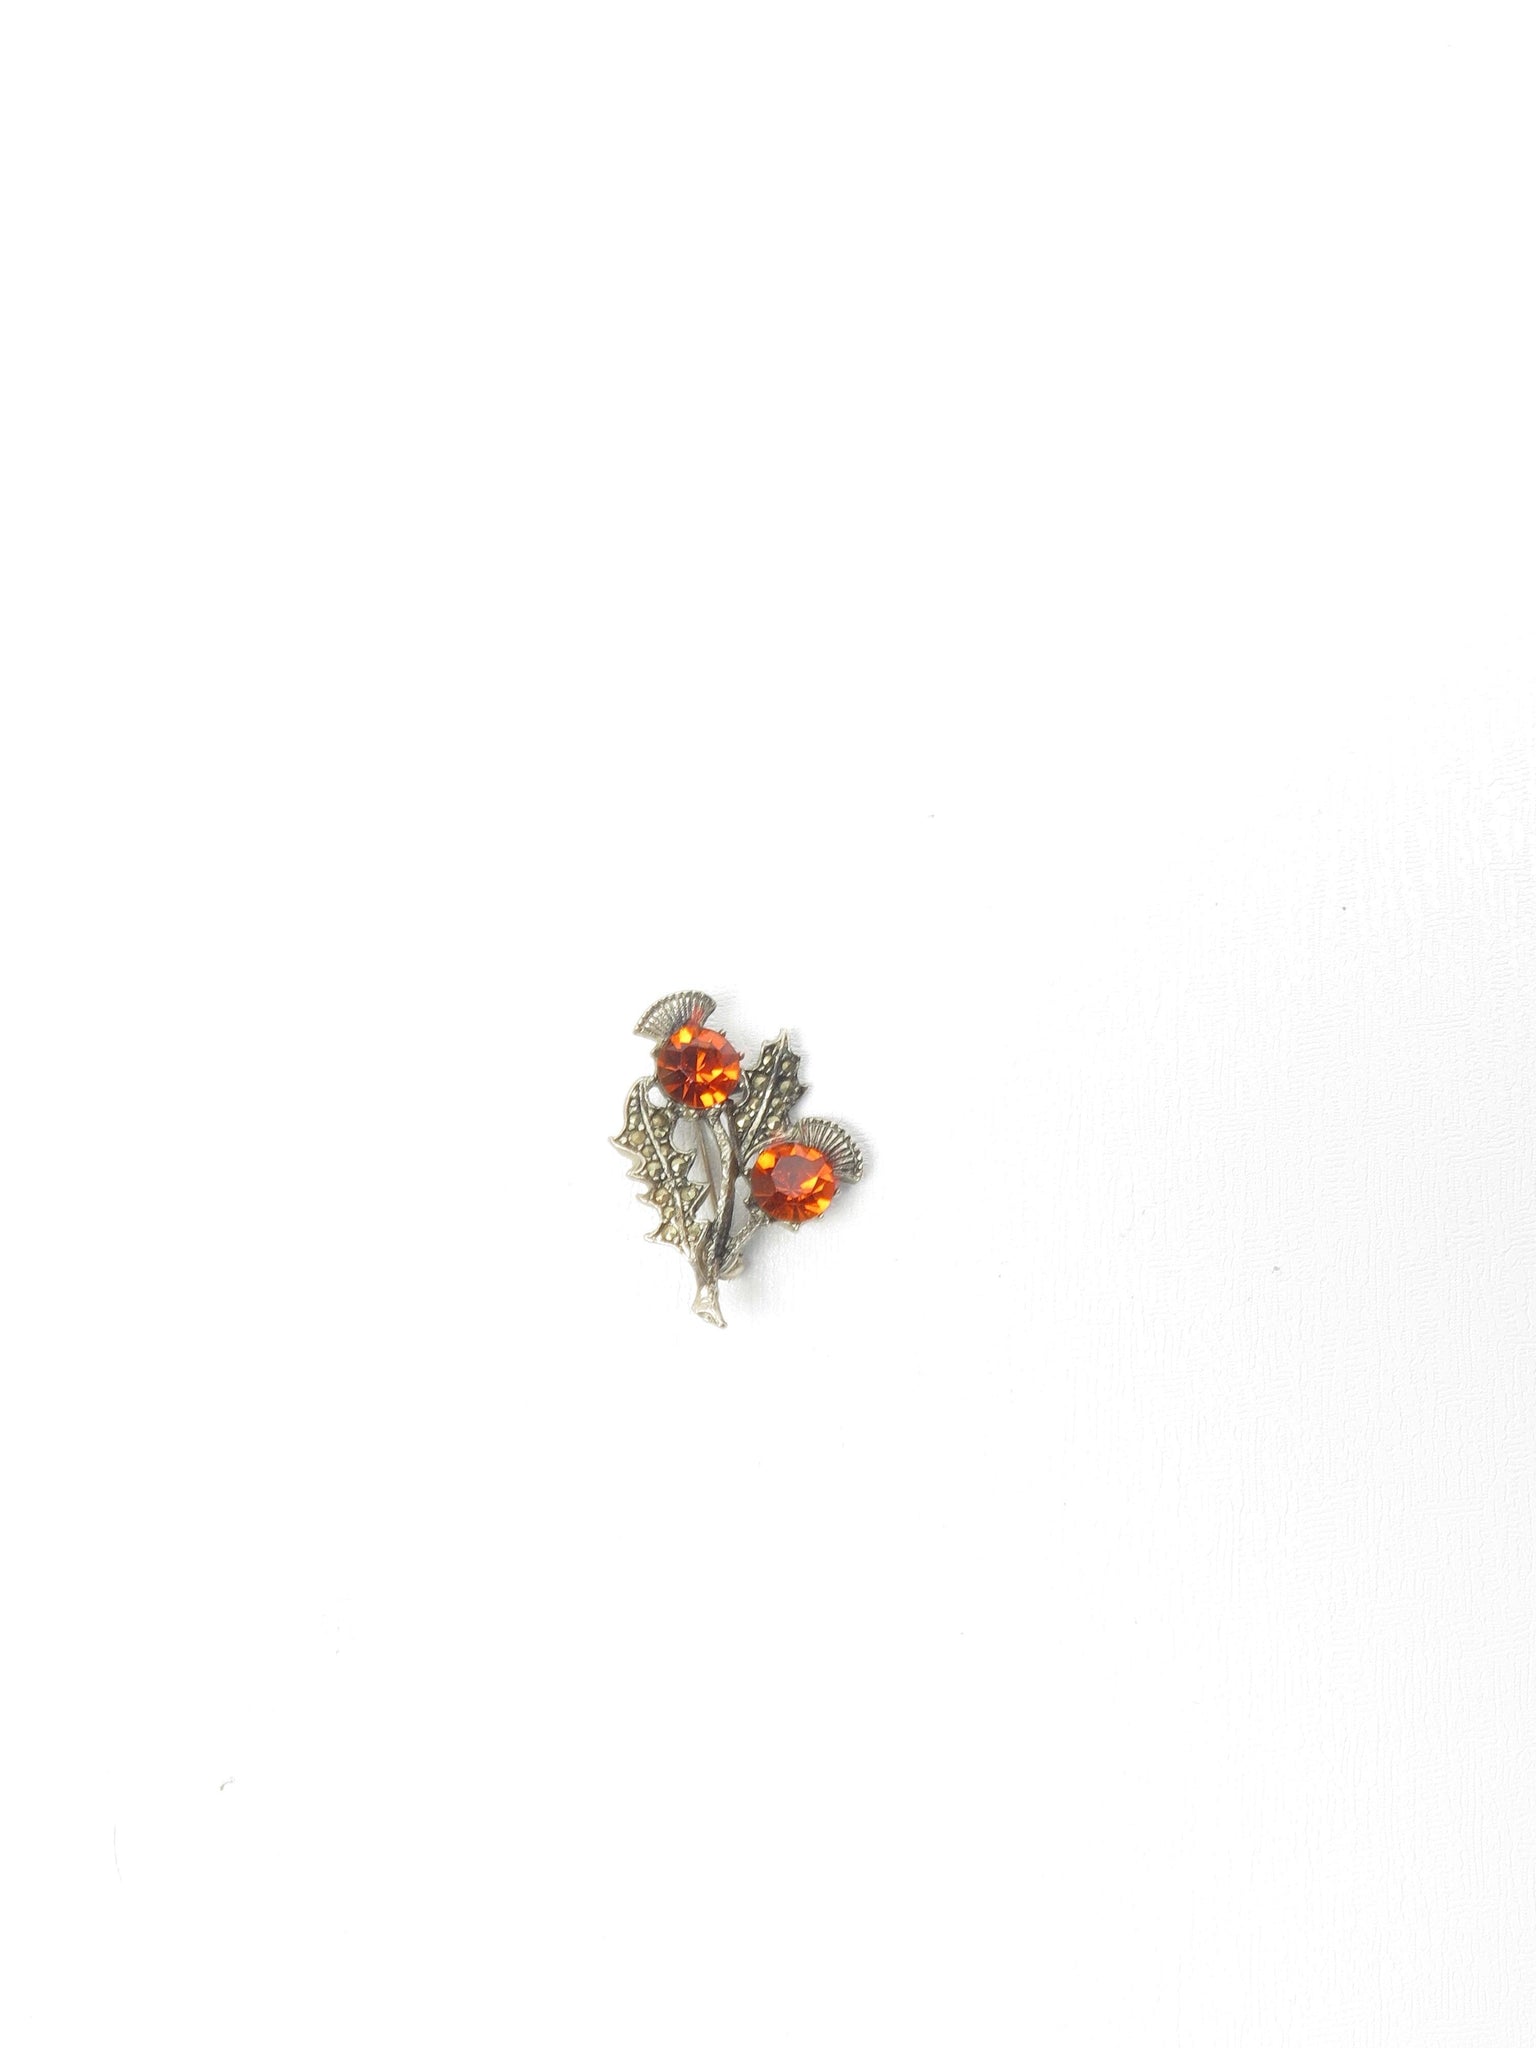 Pewter & Amber Scottish Miracle Thistle Brooch - The Harlequin